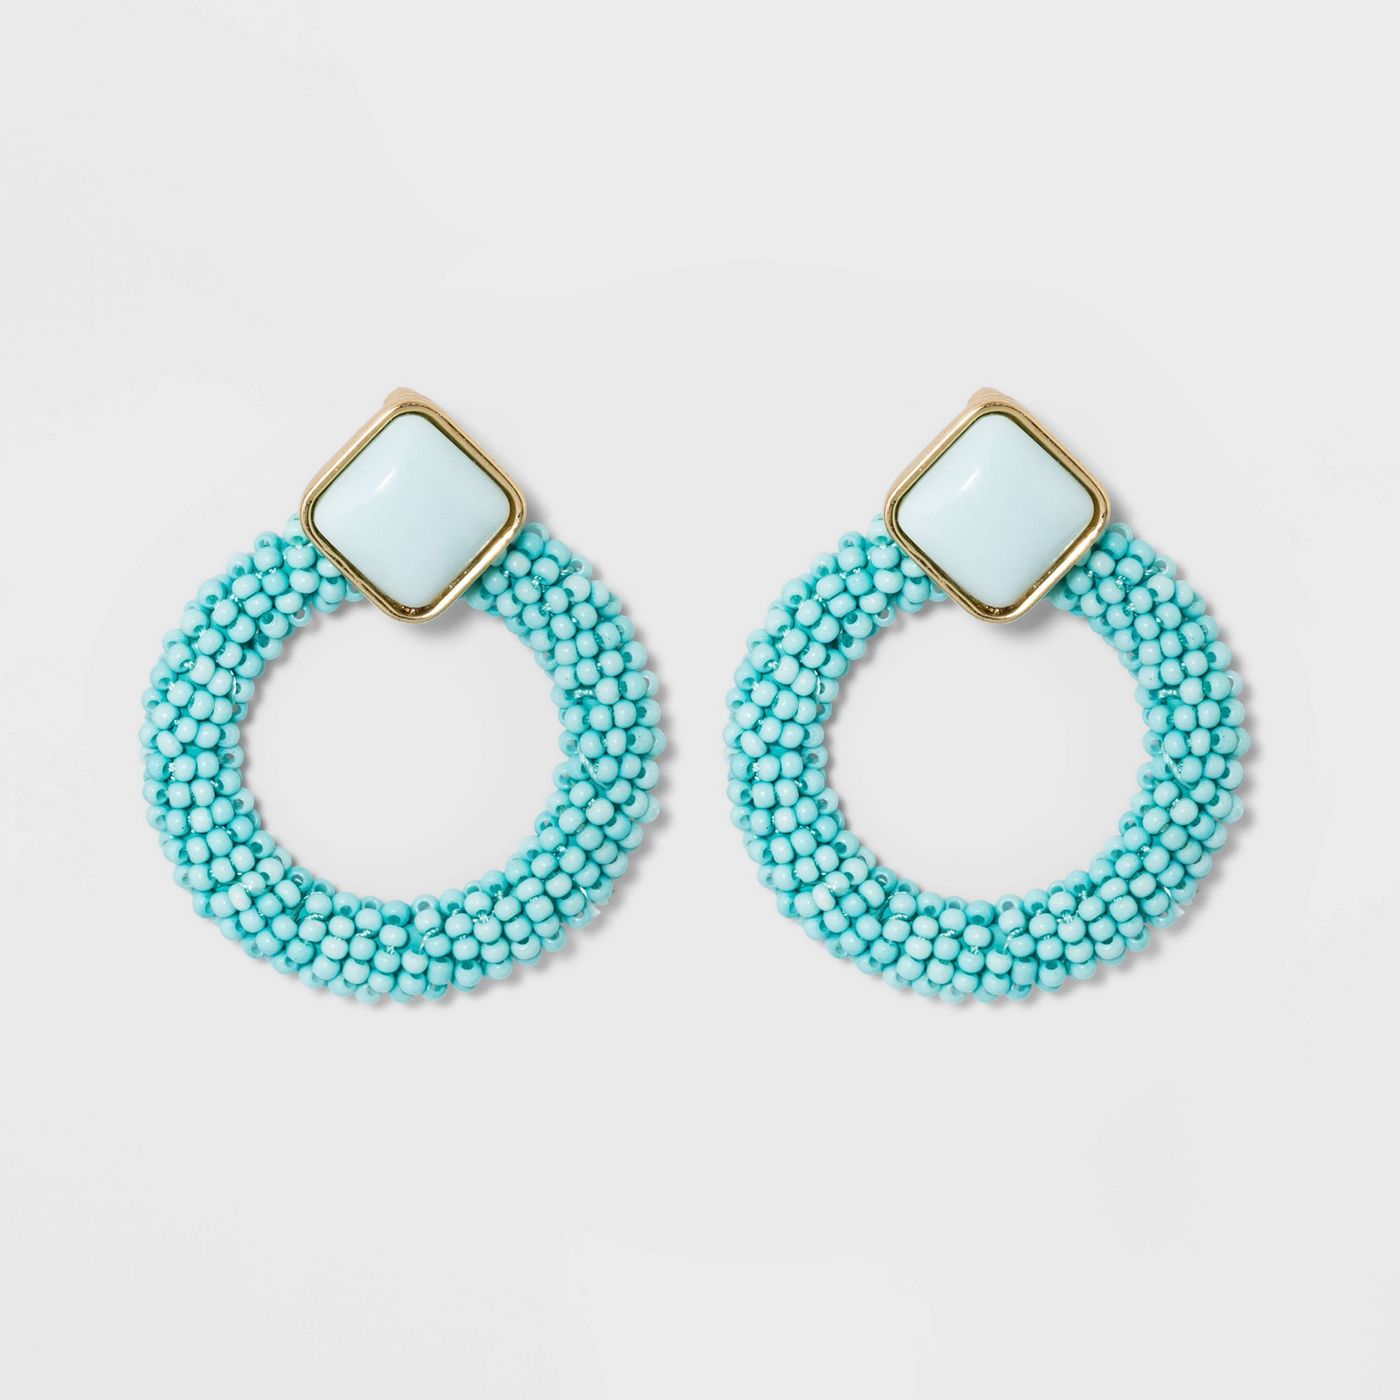 Magnolia Mamas : Friday Favorites: Our Favorite Statement Earrings ...